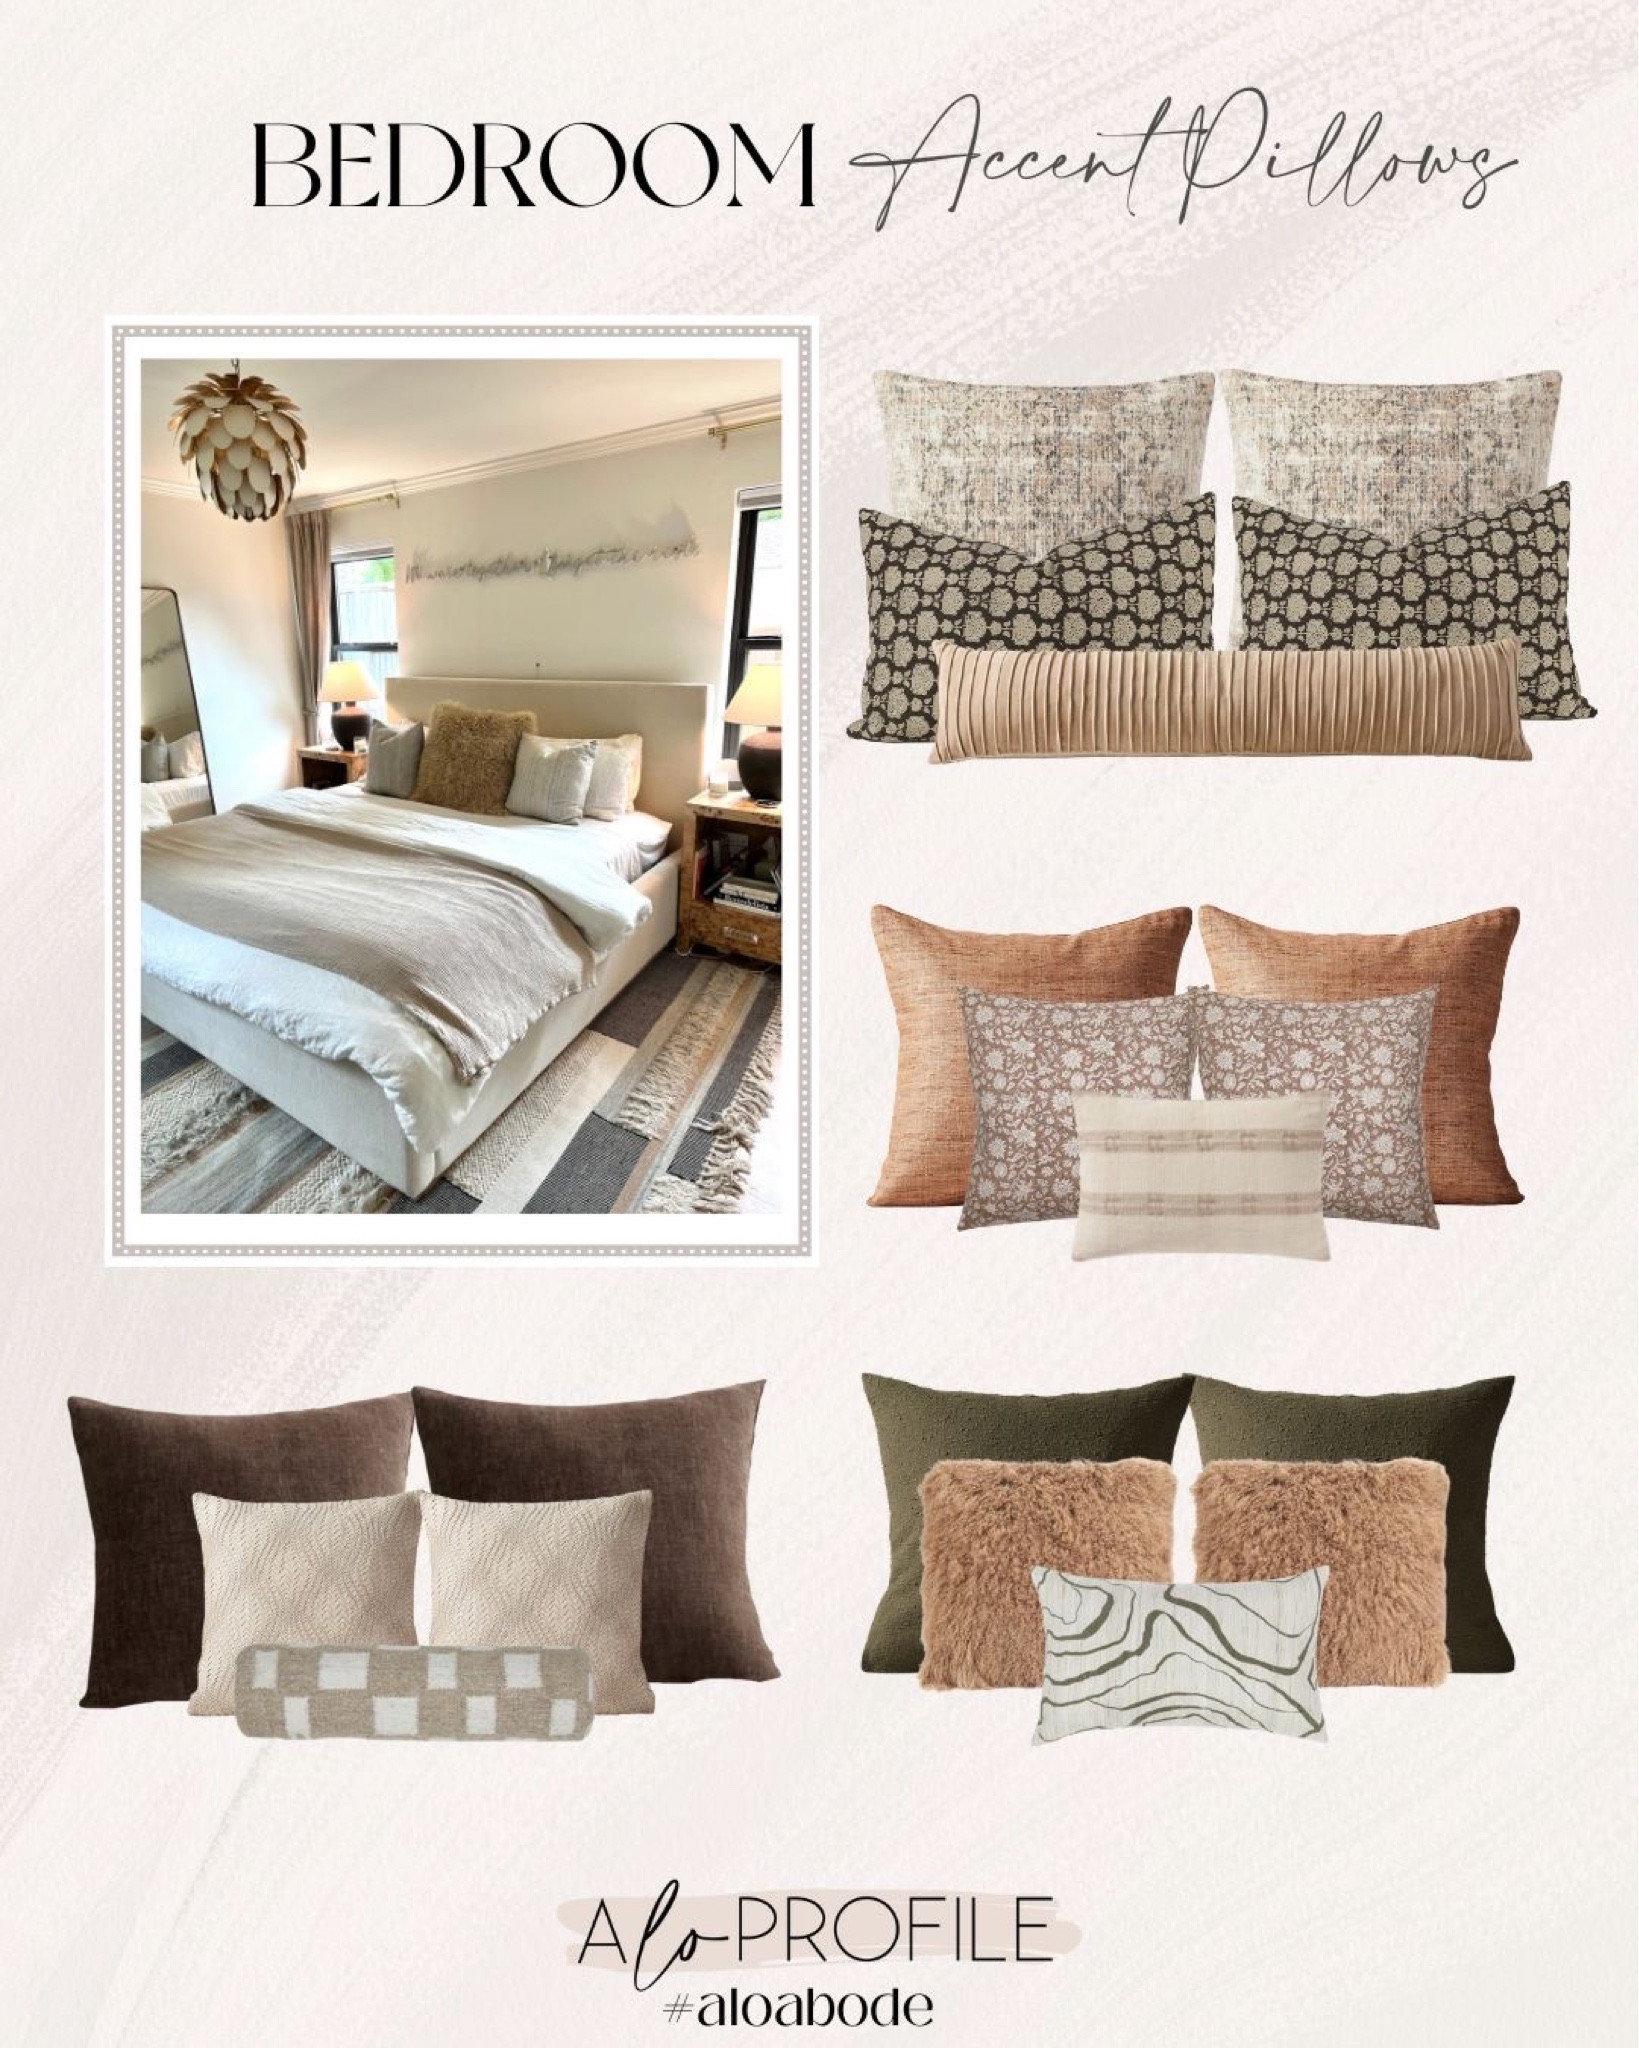 Ideal Bedroom Decor: Throw Pillows Combinations - Residential Interior  Design From DKOR Interiors